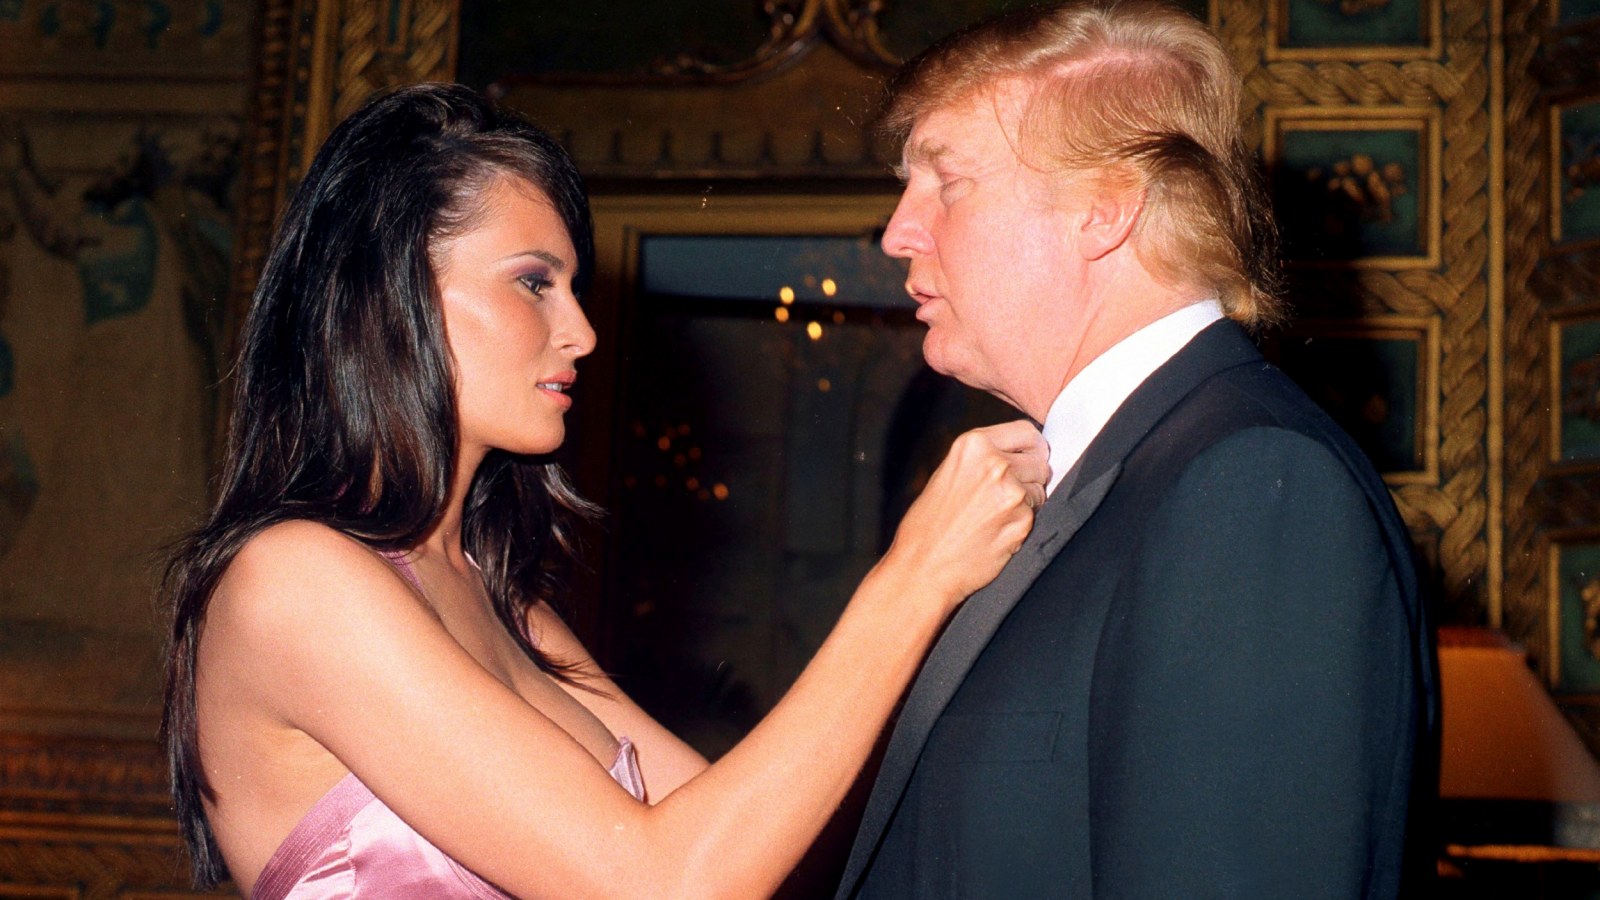 Before Proposing to Melania, Donald Trump Engaged in 'Wave of Allegedly Unwanted Touching' of Women: New Book